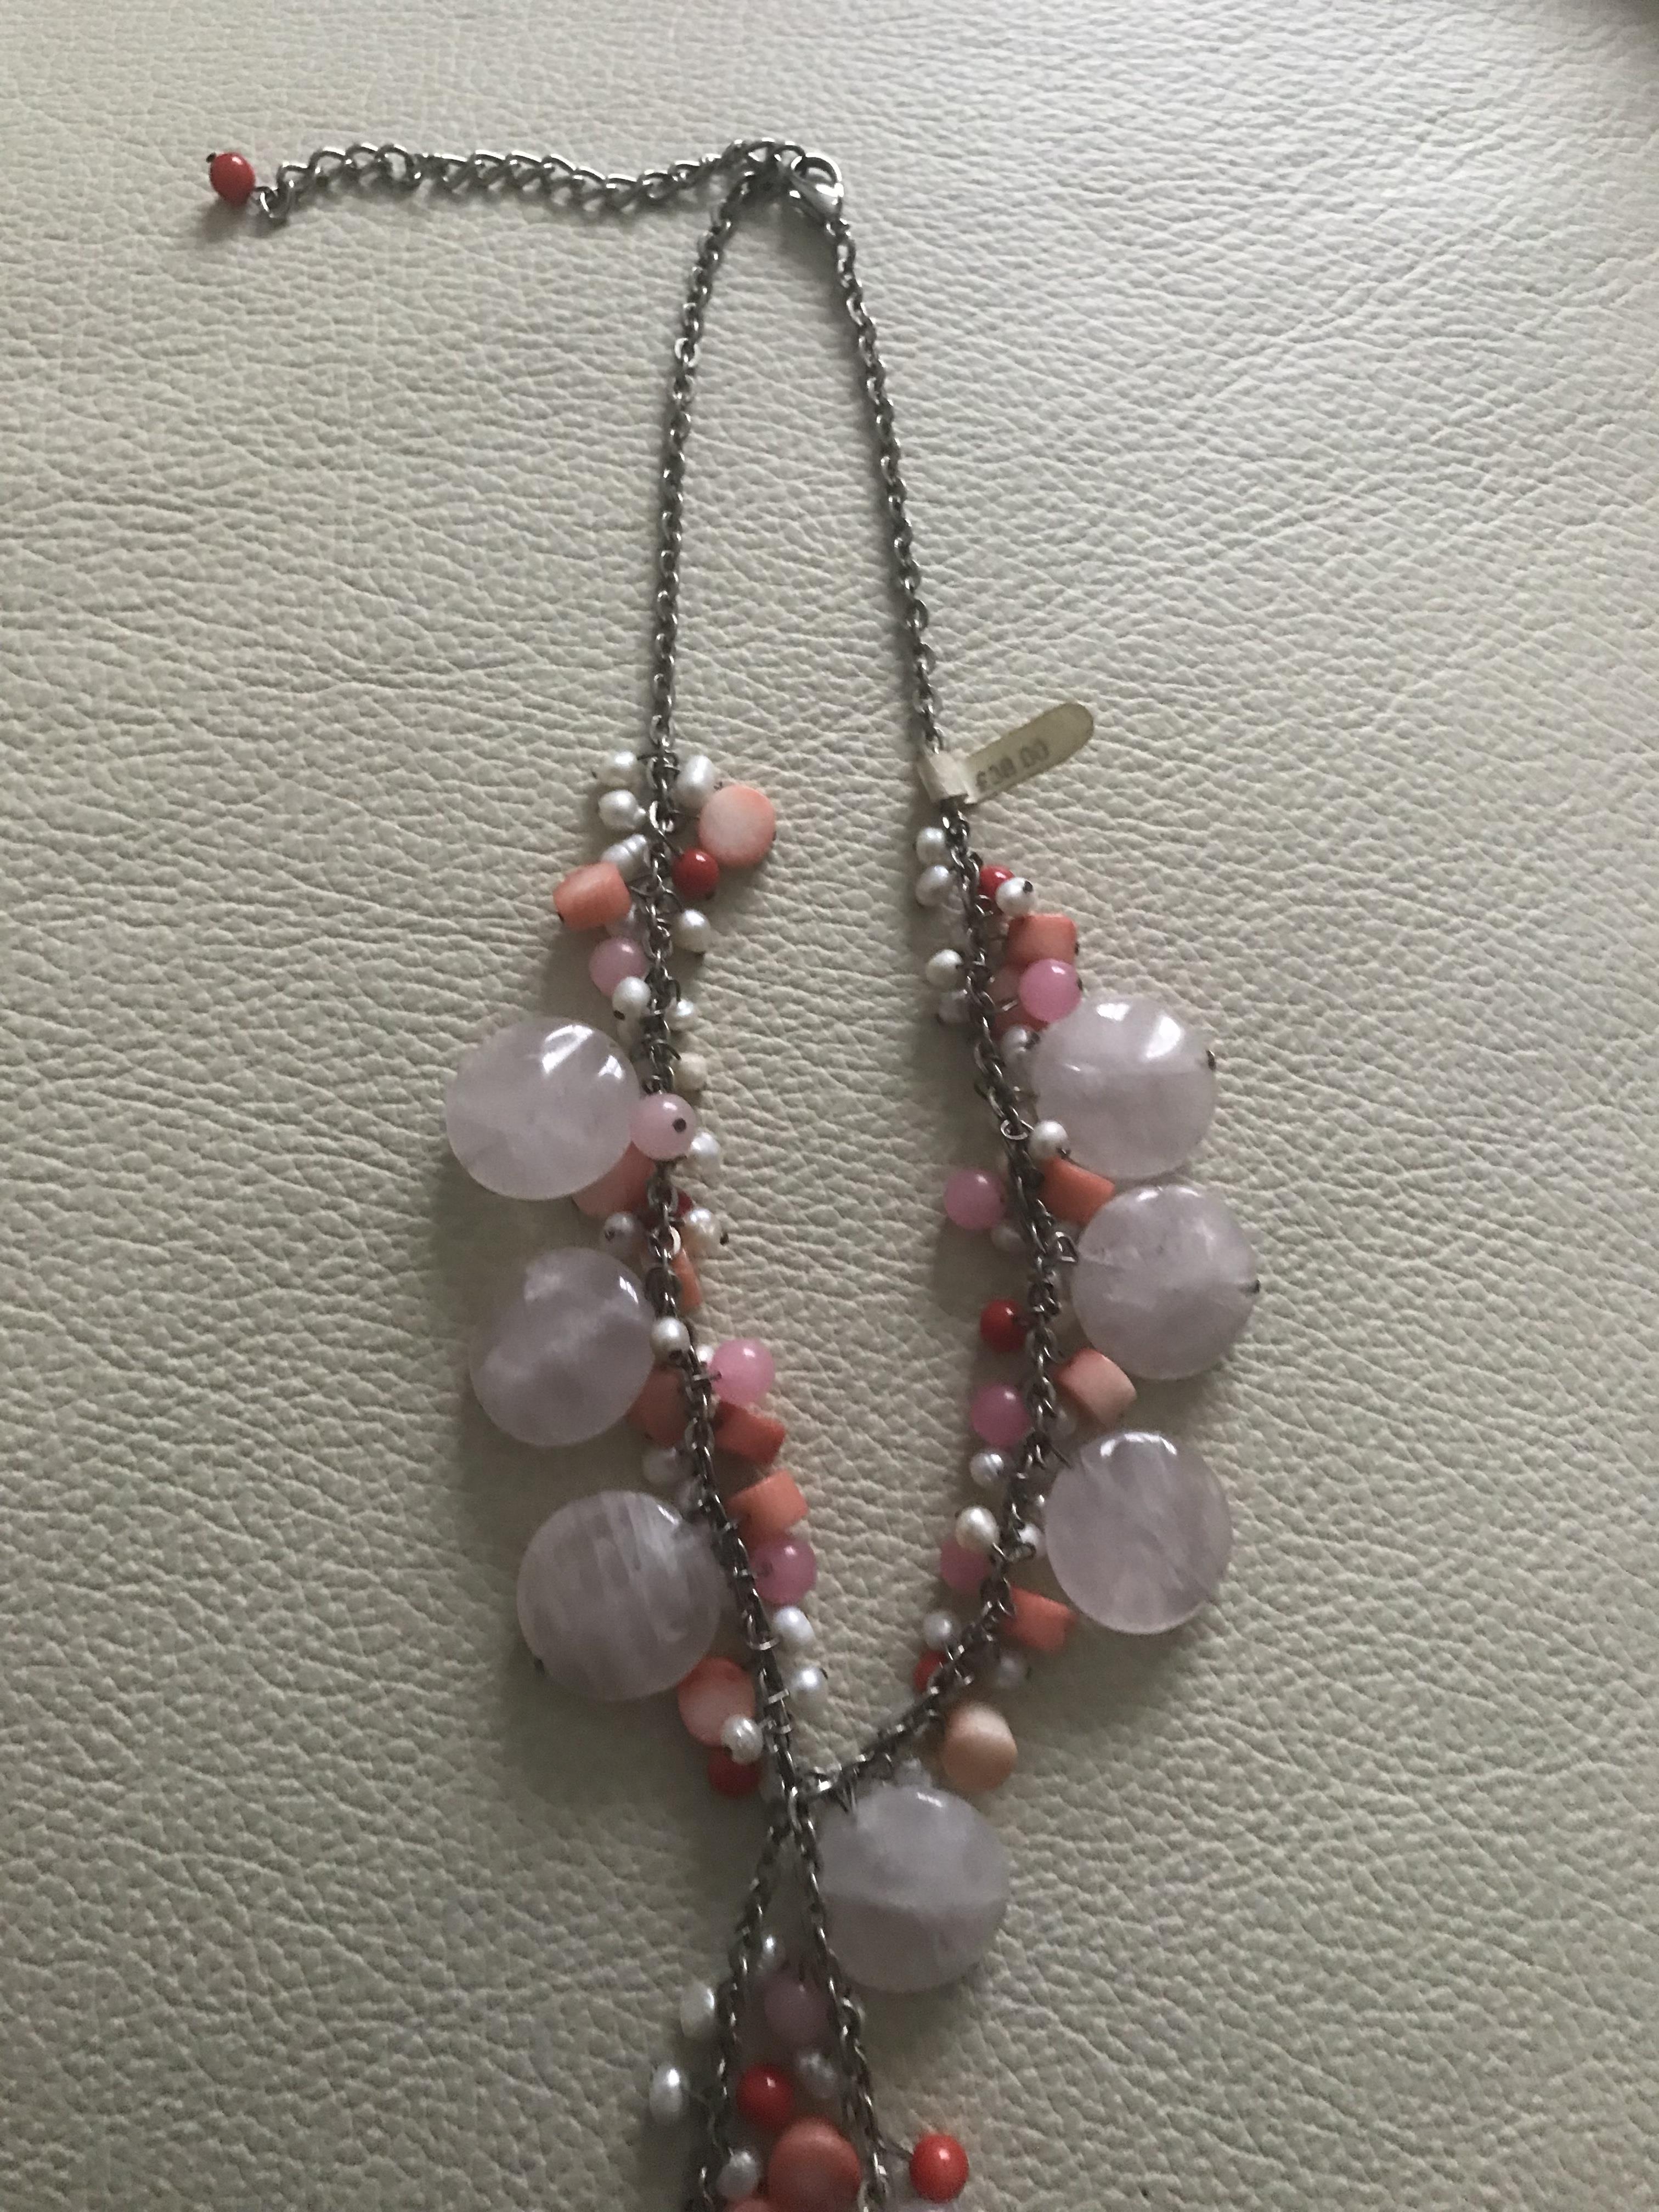 Butler & Wilson Rose Quartz, Pearl and Coral Bead Necklace - Image 3 of 5